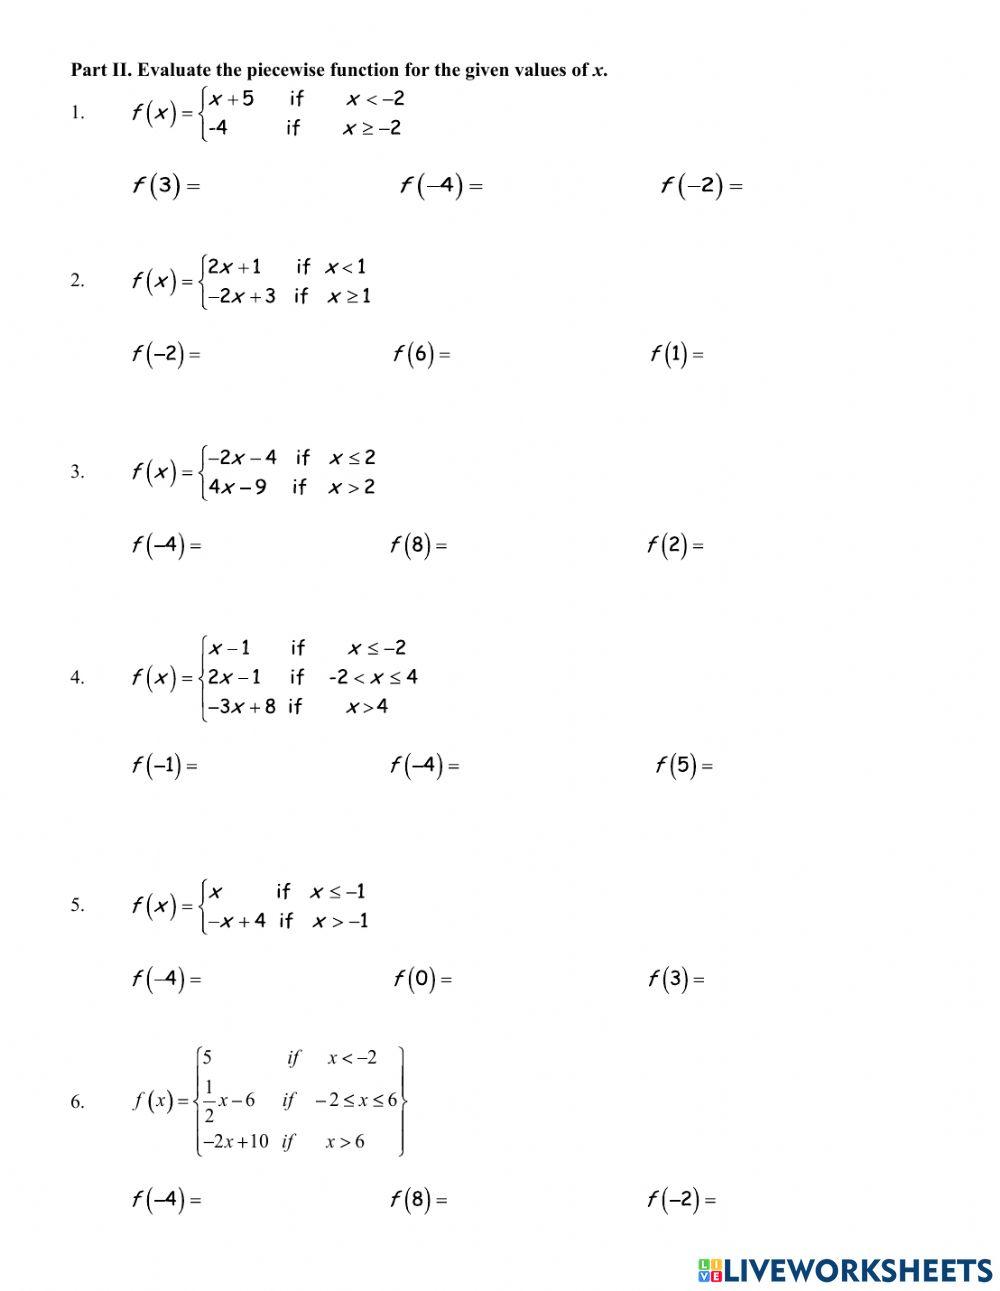 Piecewise-Defined functions interactive worksheet | Live Worksheets